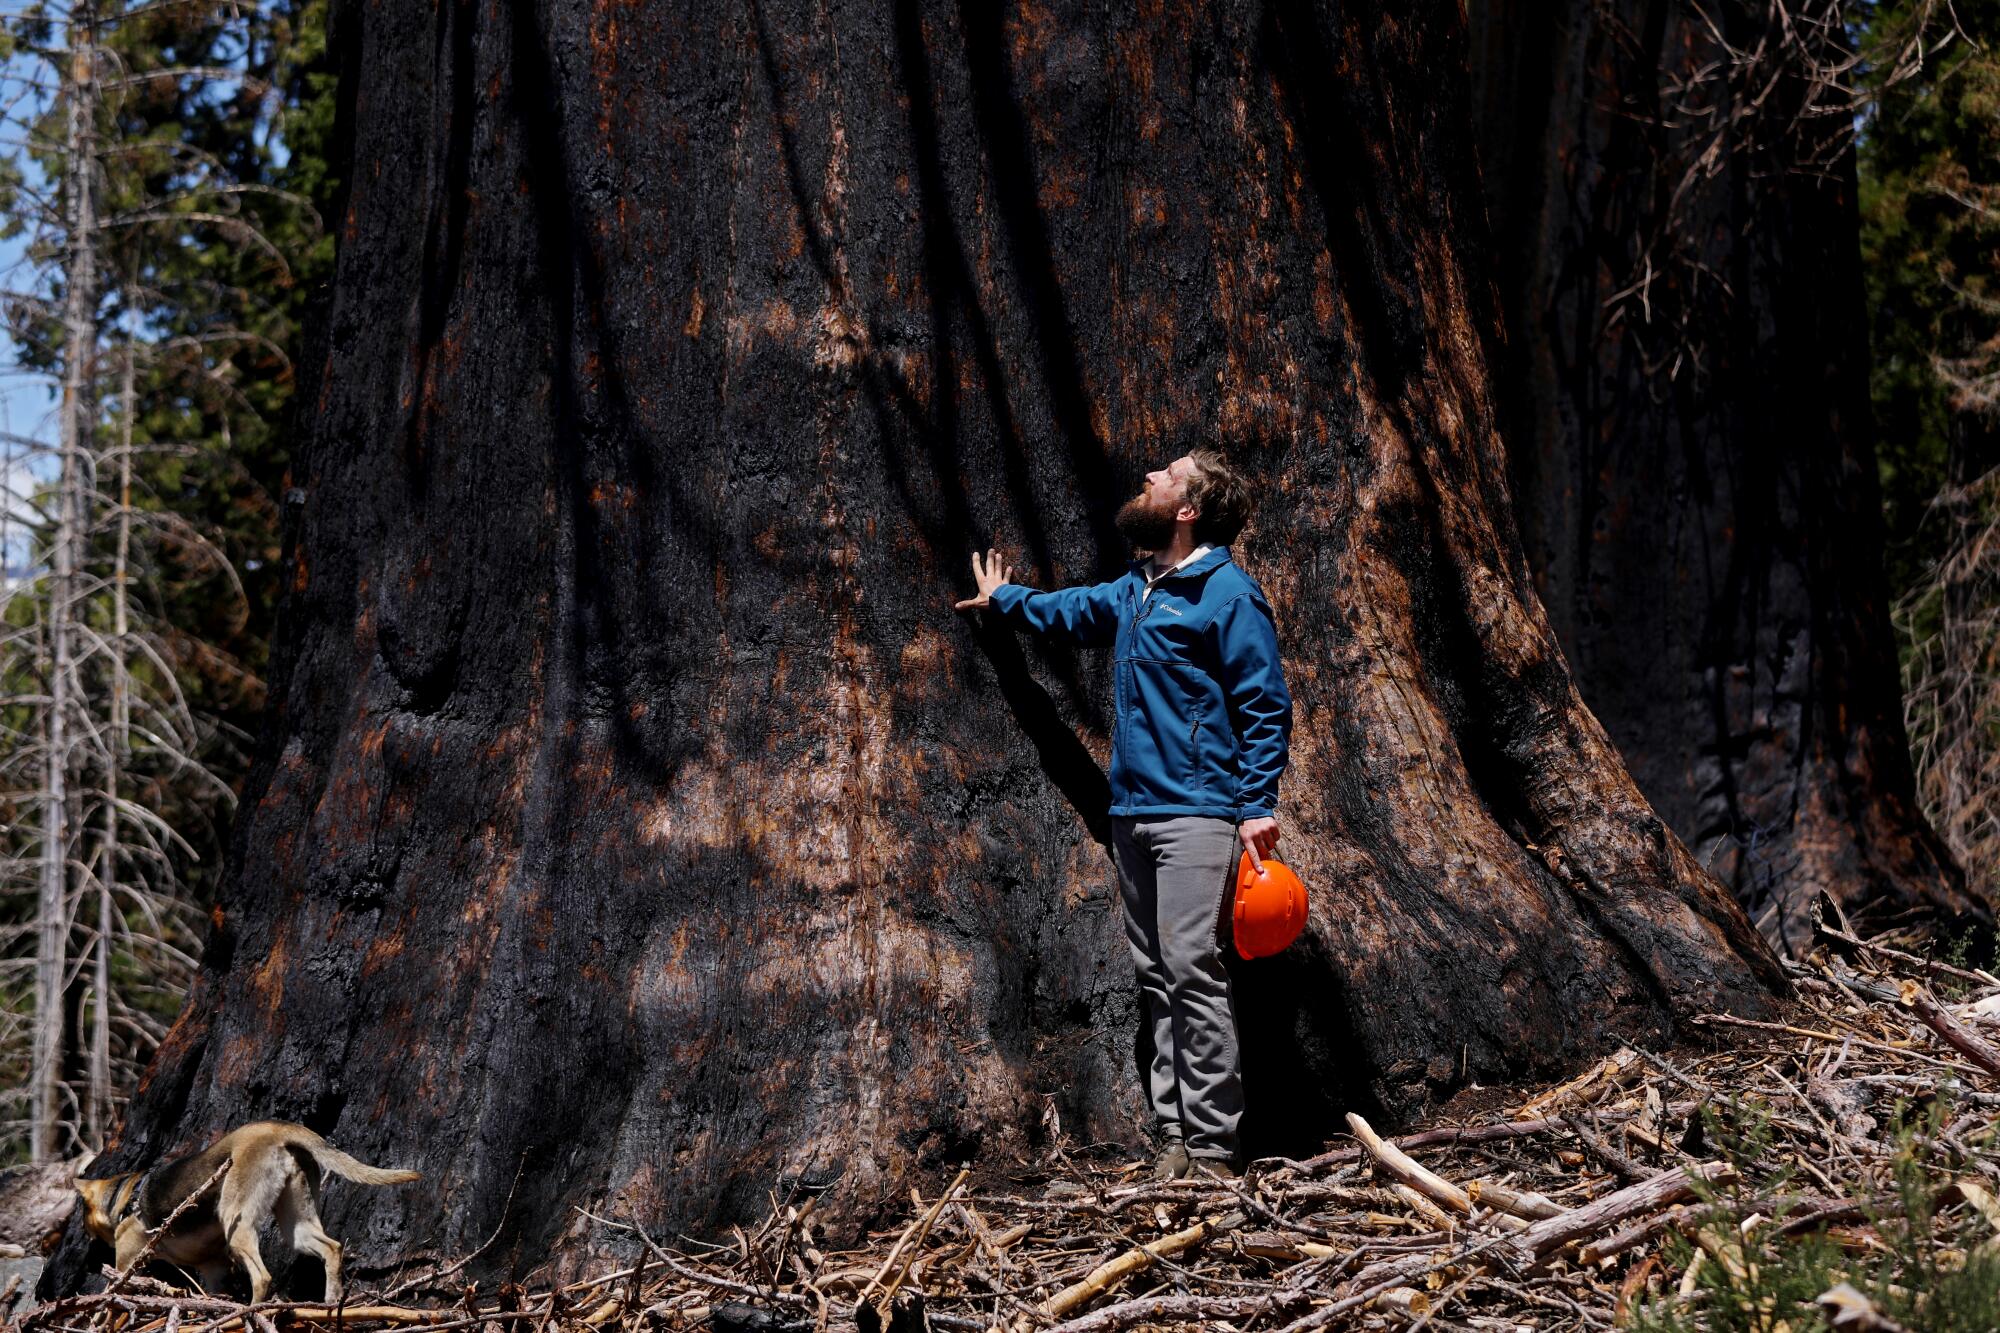 A man holding a red helmet and a dog are dwarfed by the massive trunk of a scorched sequoia tree.